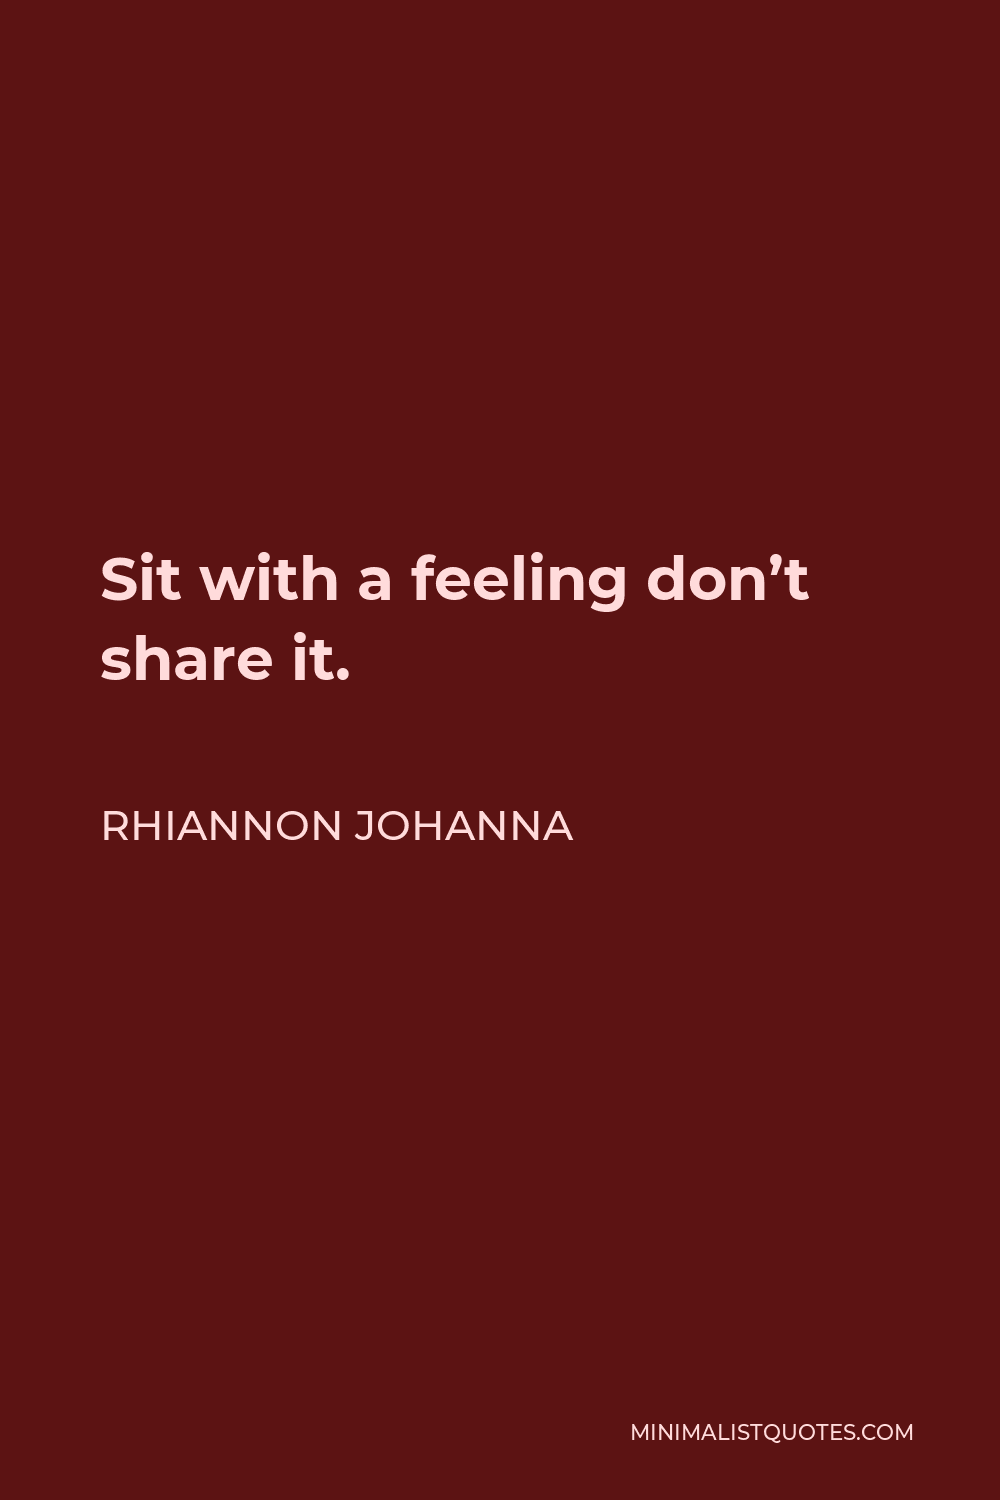 Rhiannon Johanna Quote - Sit with a feeling don’t share it.